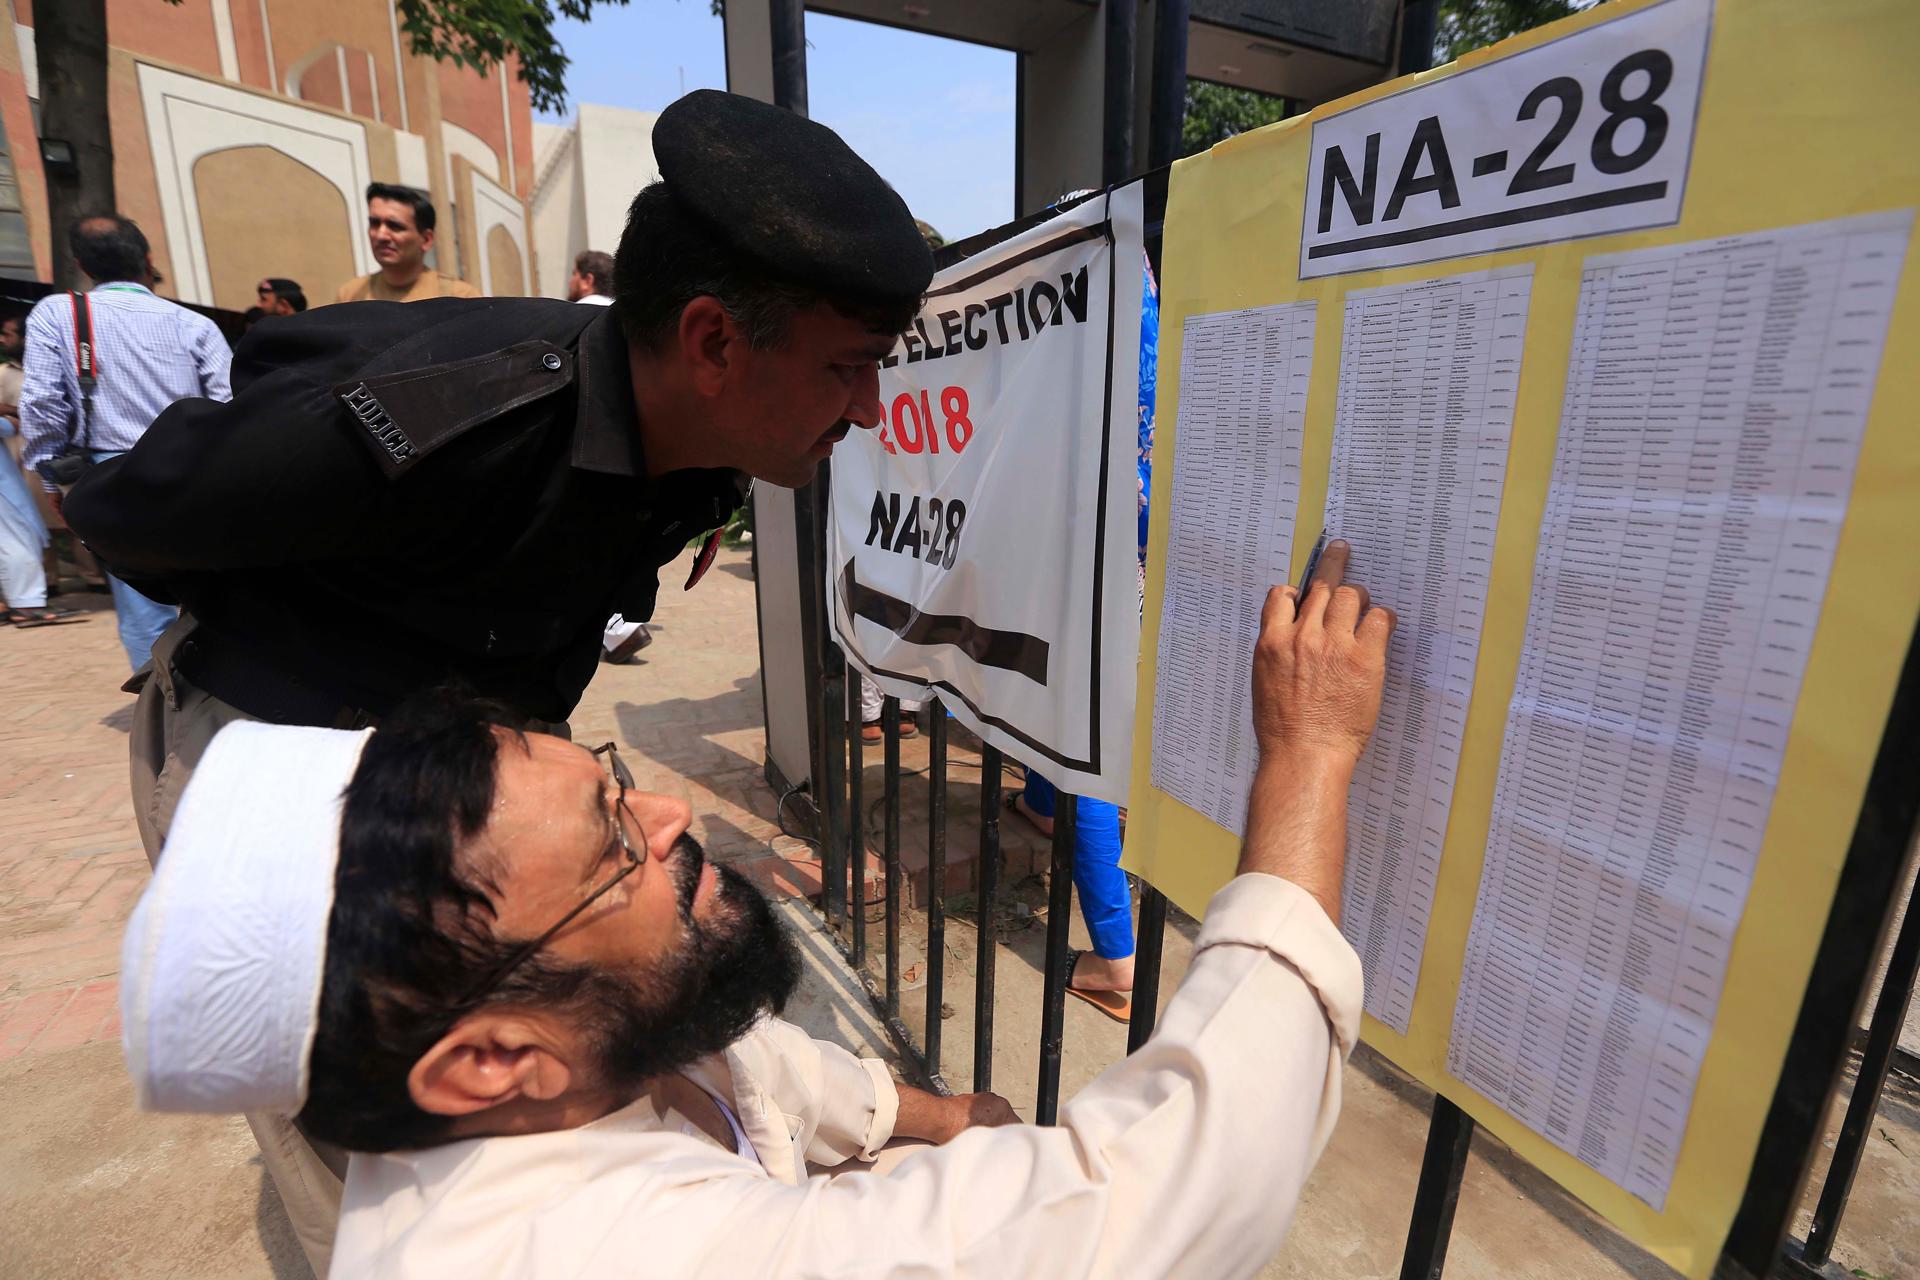 (FILE) Men read instructions on how to receive election materials at a distribution center on the eve of the general elections in Peshawar, capital of Khyber-Pakhtunkhwa province, Pakistan, July 24, 2018.EFE / BILAWAL ARBAB